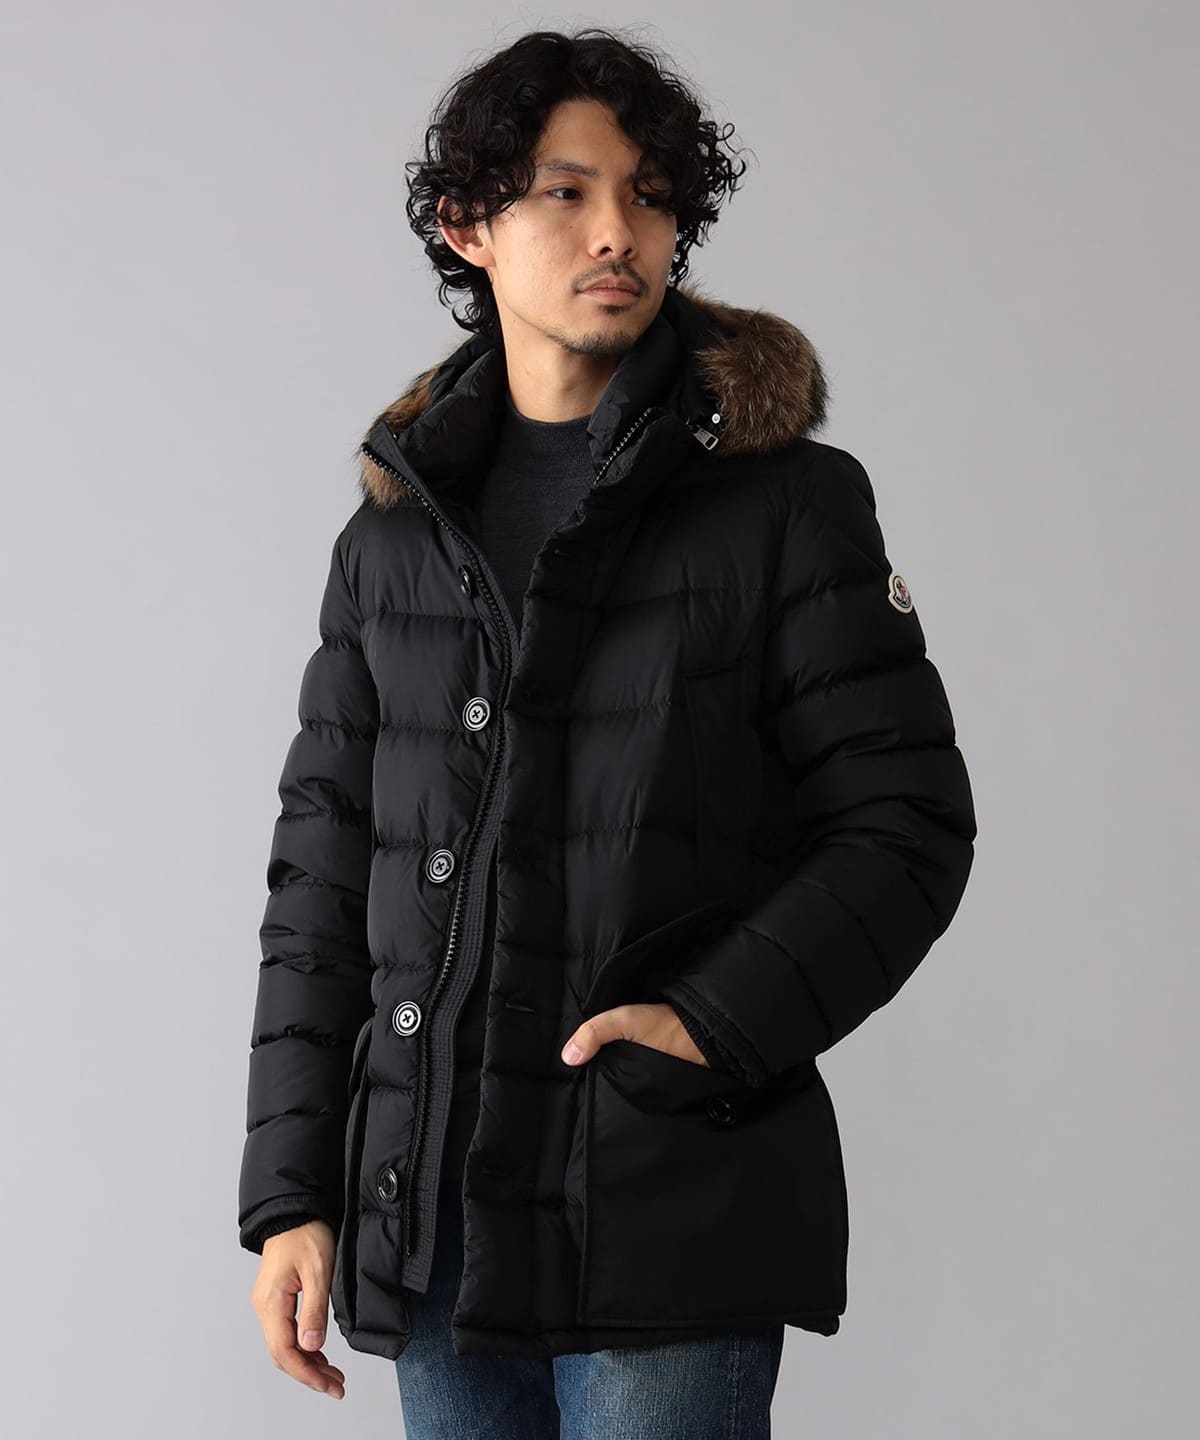 【10%OFF!!アウターフェア対象】MONCLER / CLUNY ナイロン